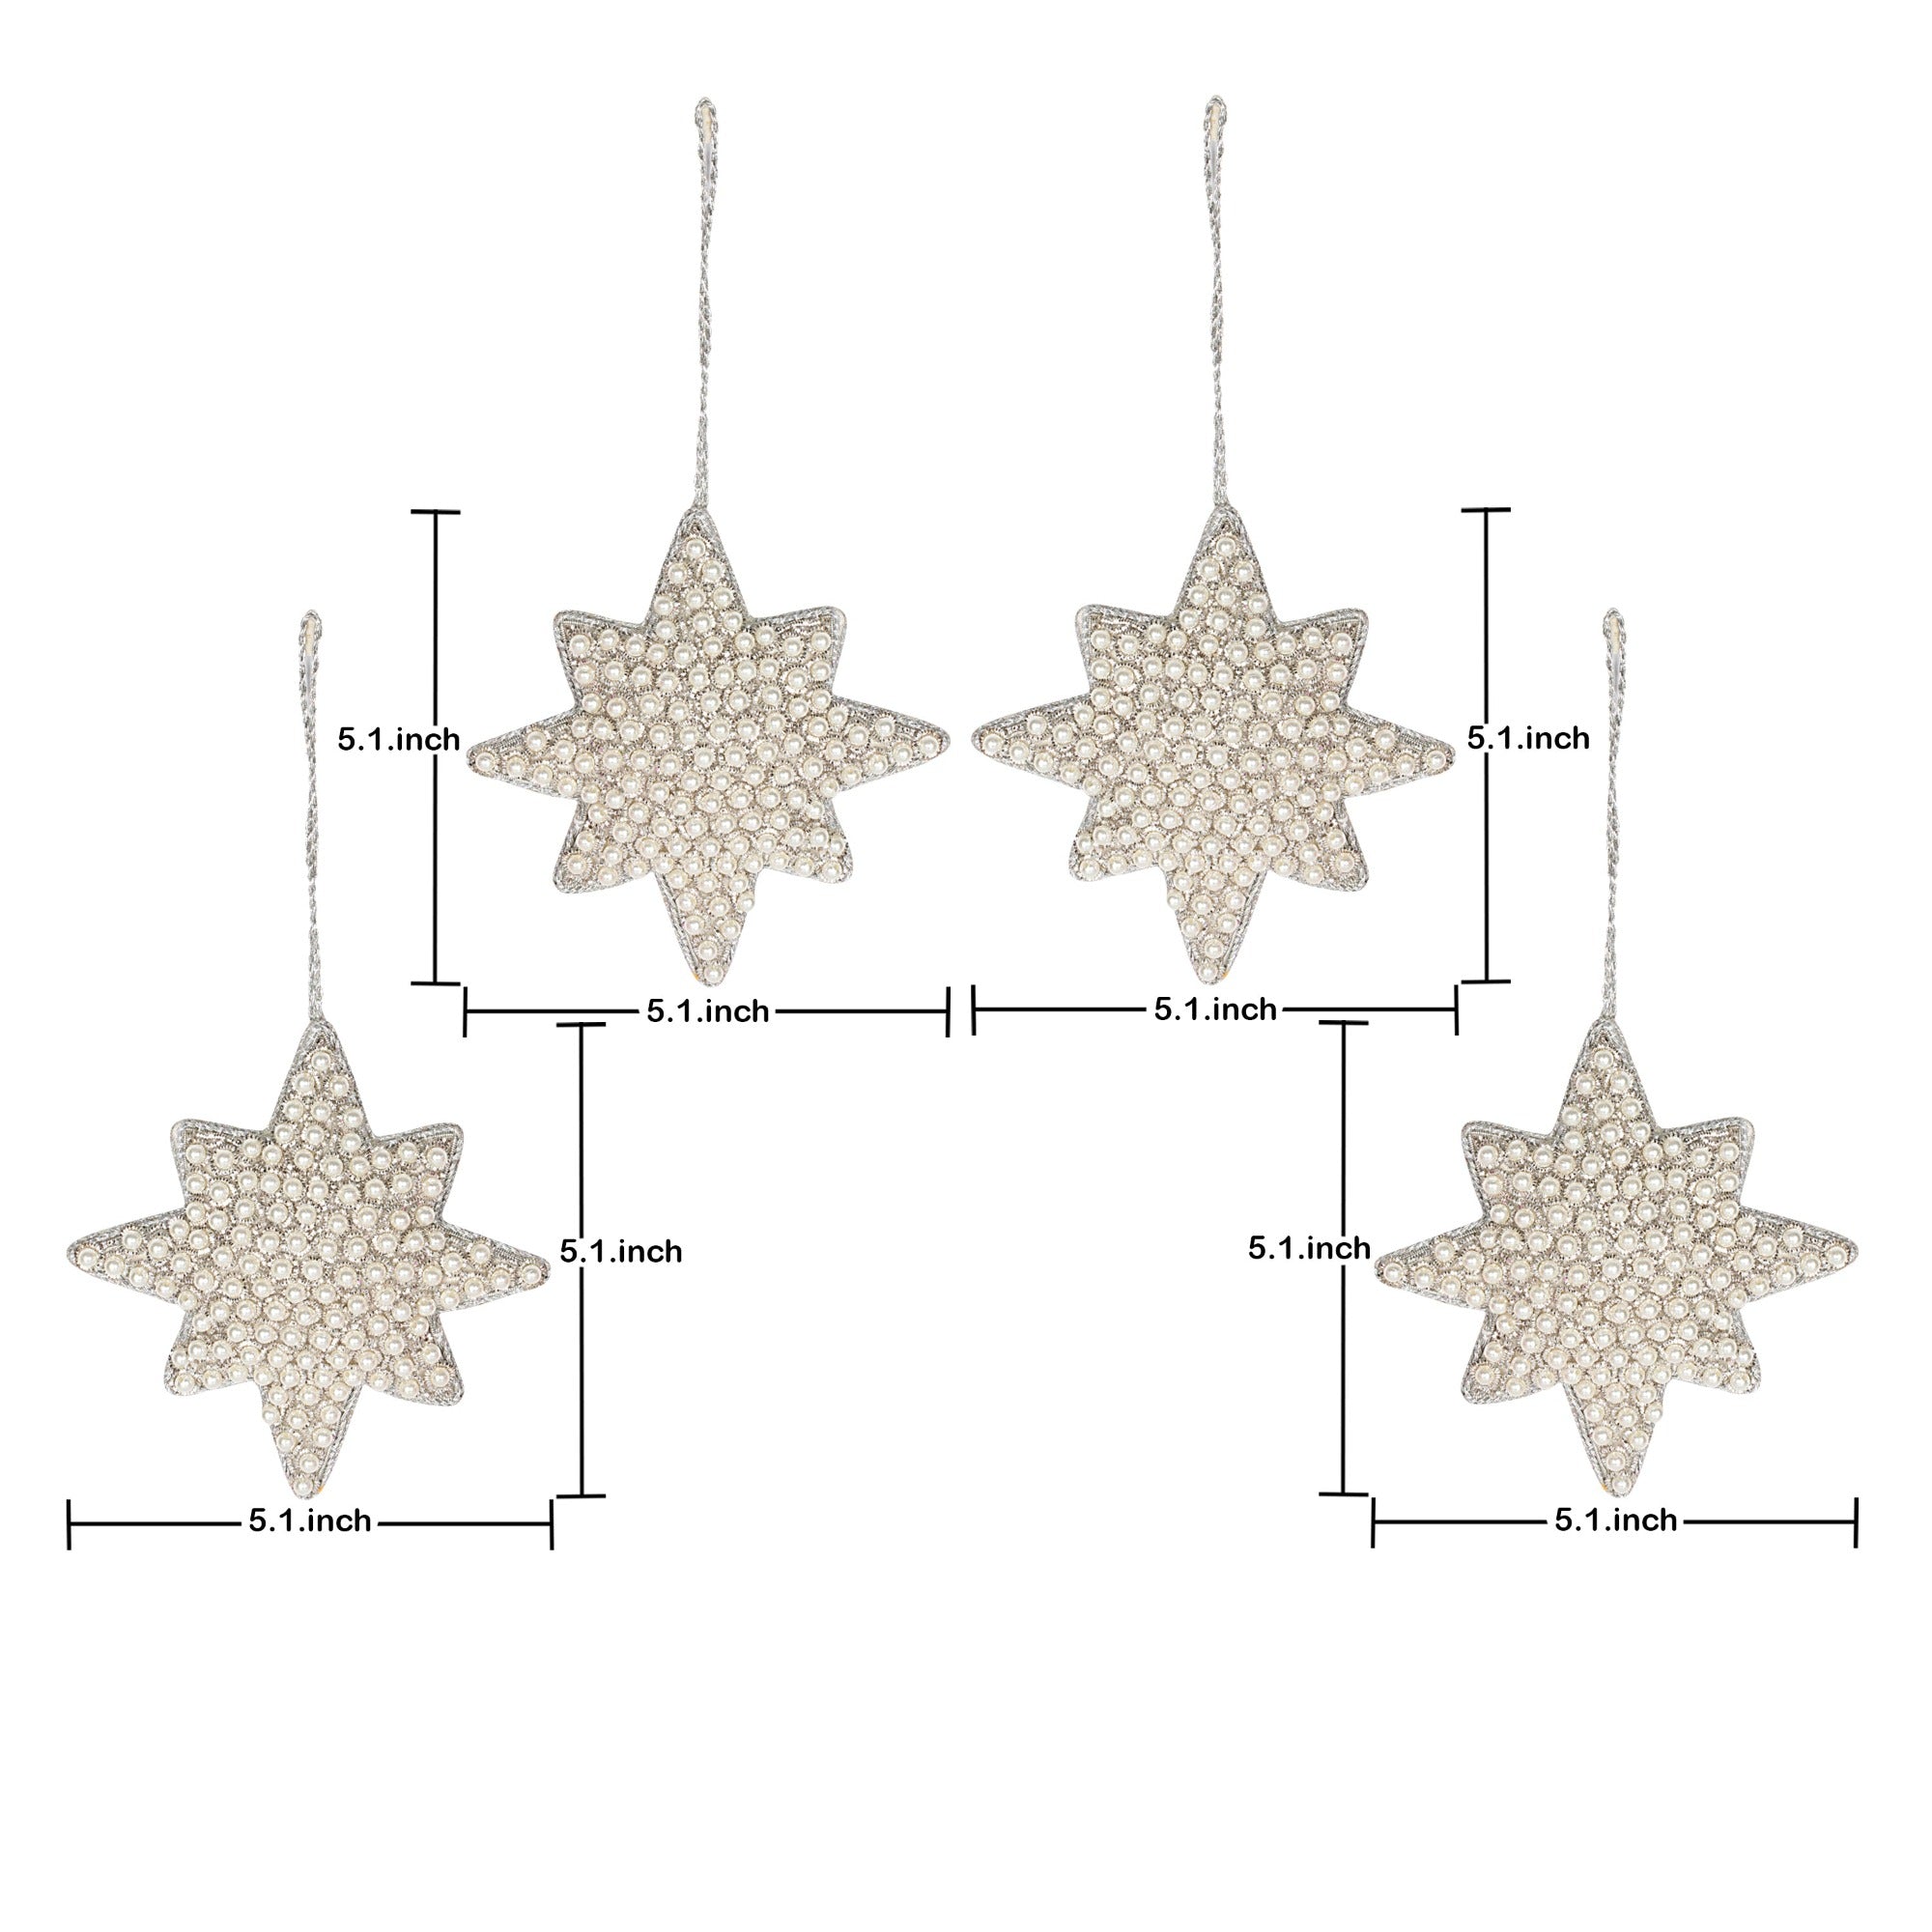 Pearly Stars Christmas ornaments set of 4 pieces for holiday decor (1SET= 4PC)